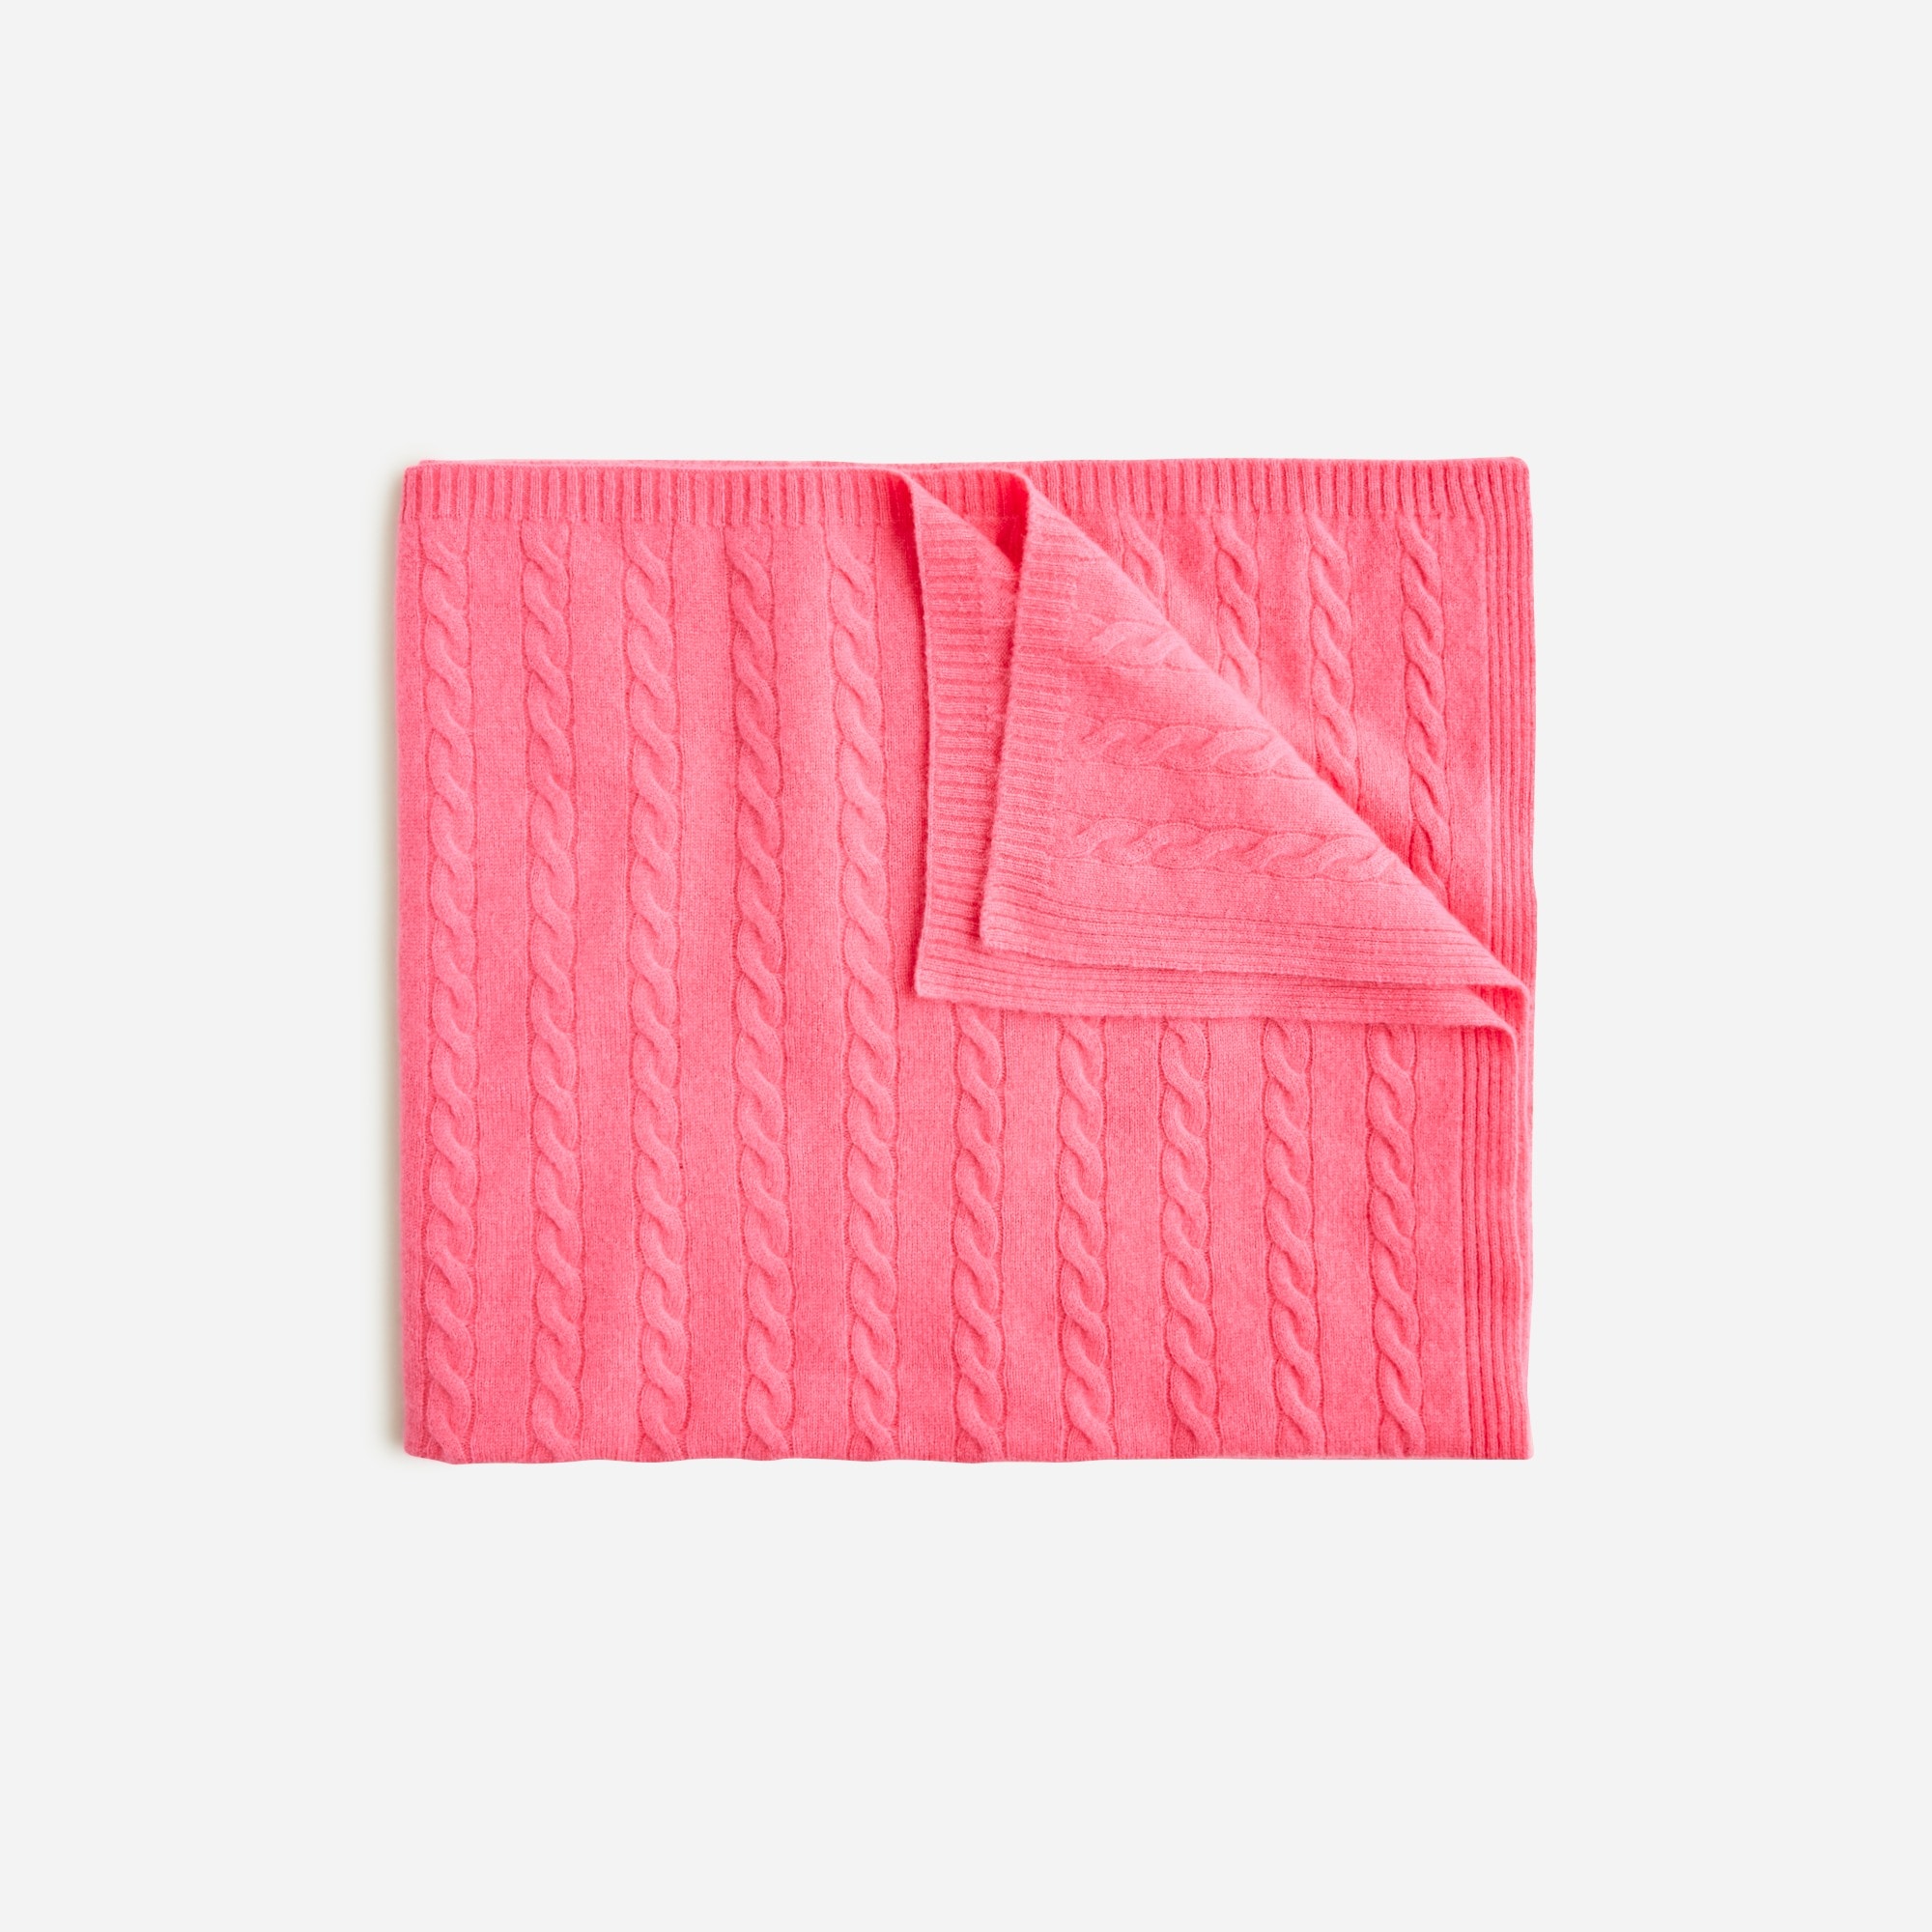 Jcrew Limited-edition baby cashmere blanket